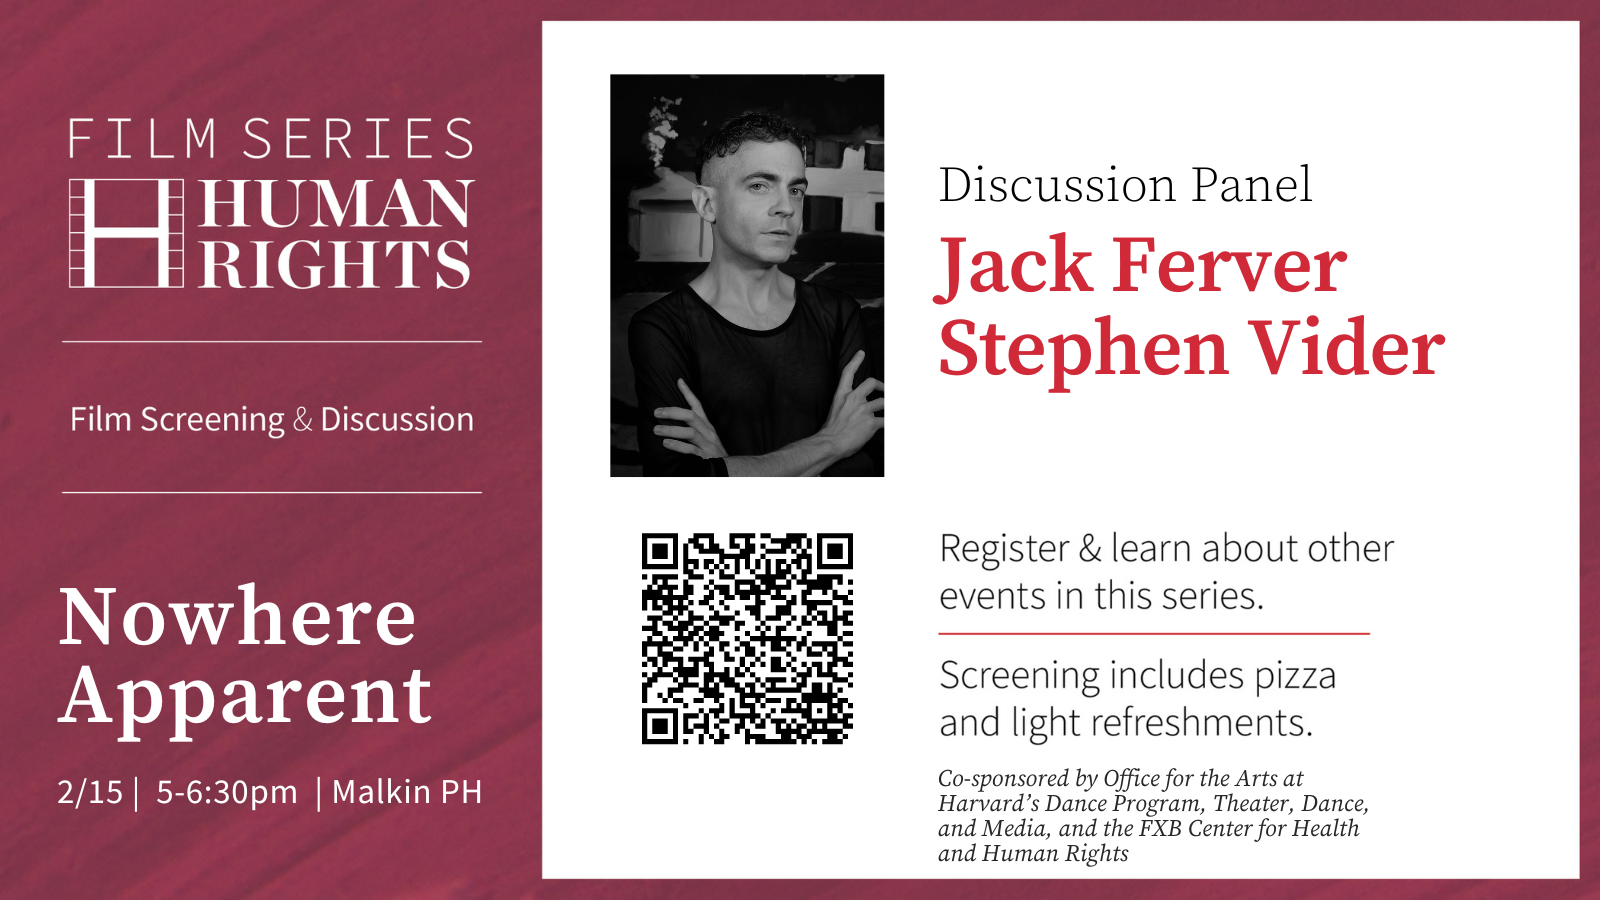 Human Rights Film Series Poster: Discussion Panel with Jack Ferver and Stephen Vider. Nowhere Apparent. 2/15, 5-6:30pm, Malkin Penthouse.